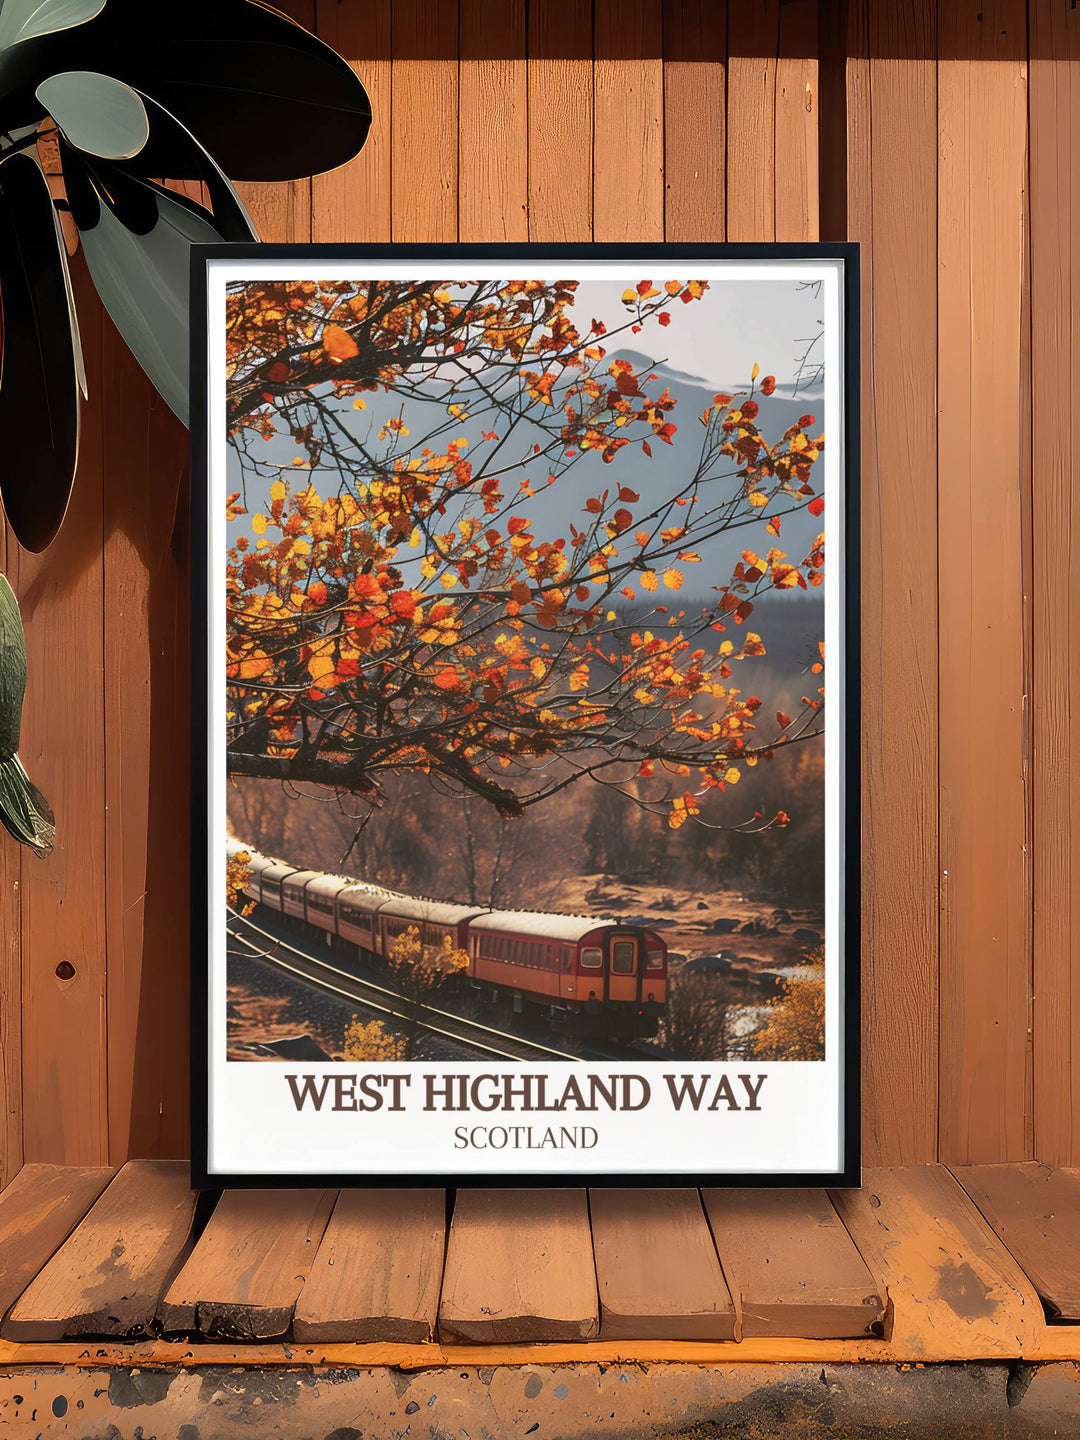 Poster of Fort William, capturing the spirit of adventure and stunning landscapes along the Western Highland Way in detailed and vibrant artwork.